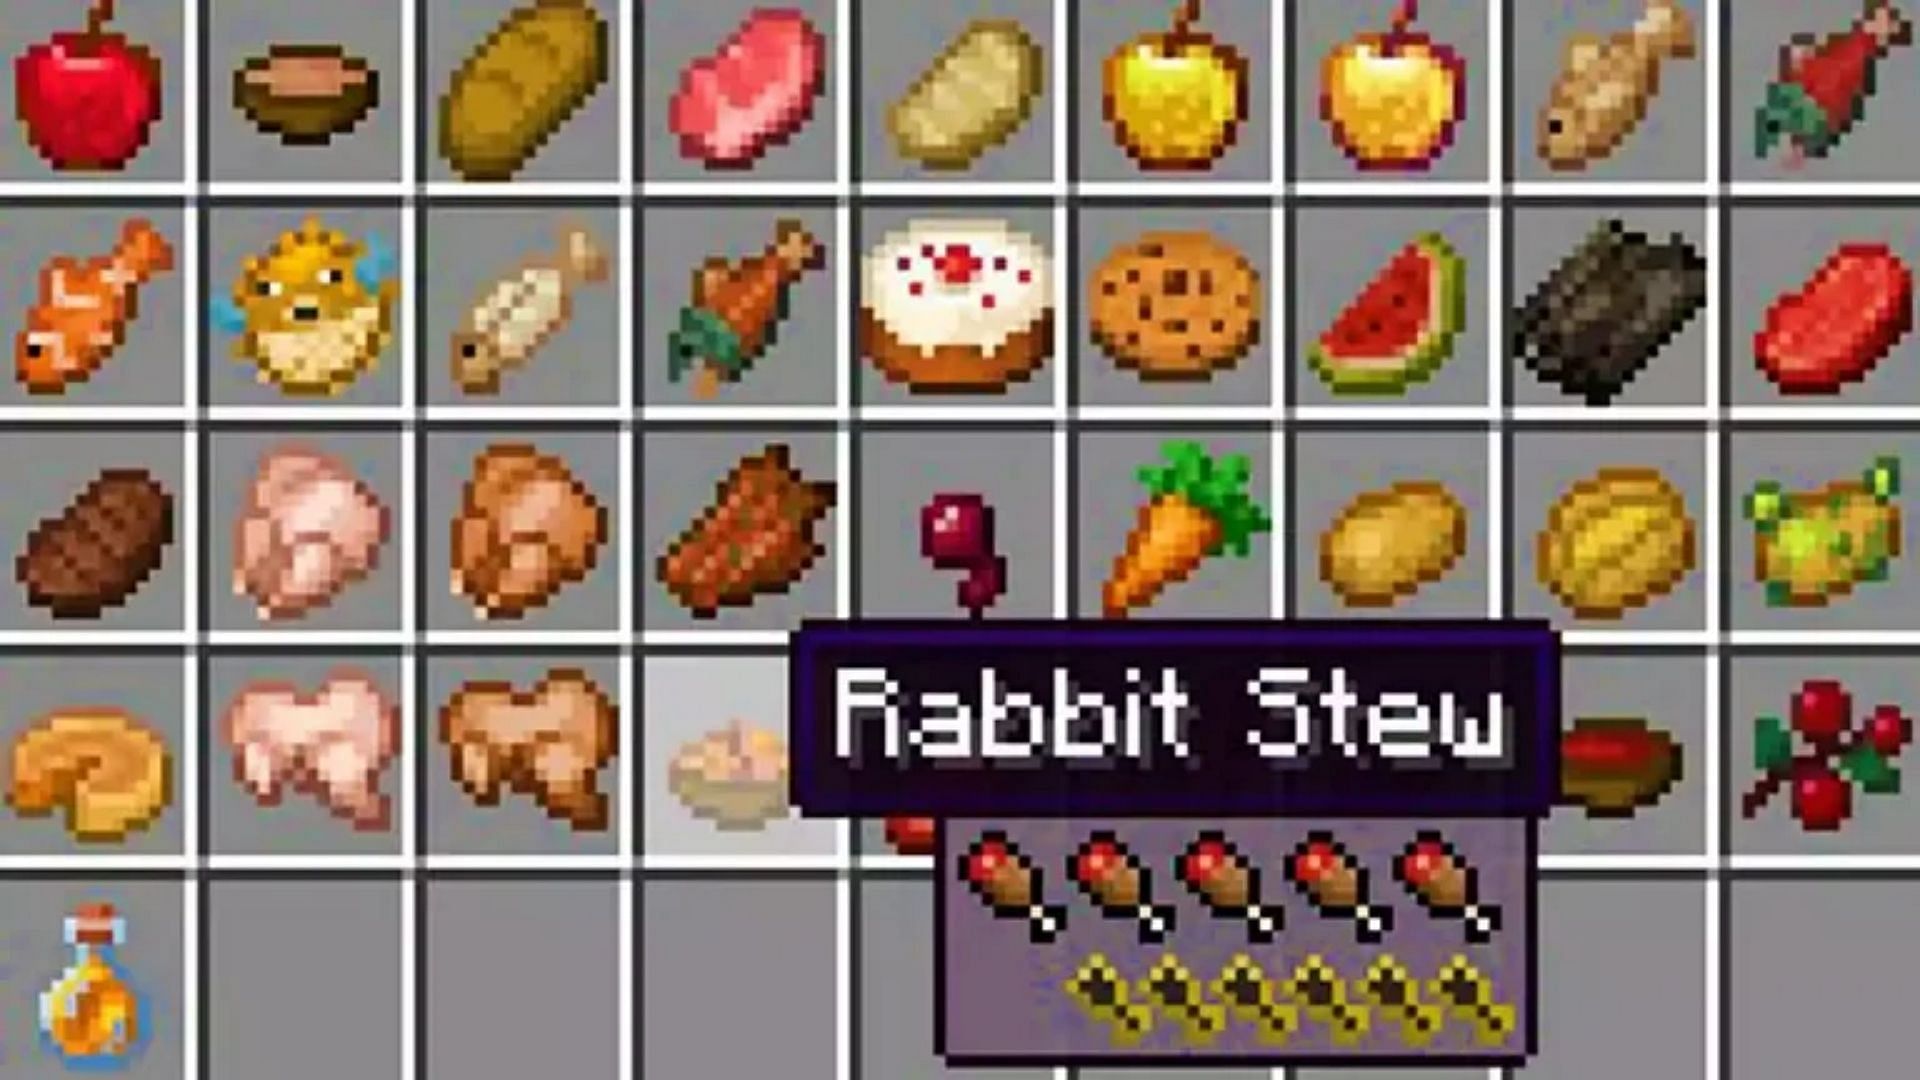 AppleSkin mod shows a more detailed information about food items (Image via bestminecraftmods.net)